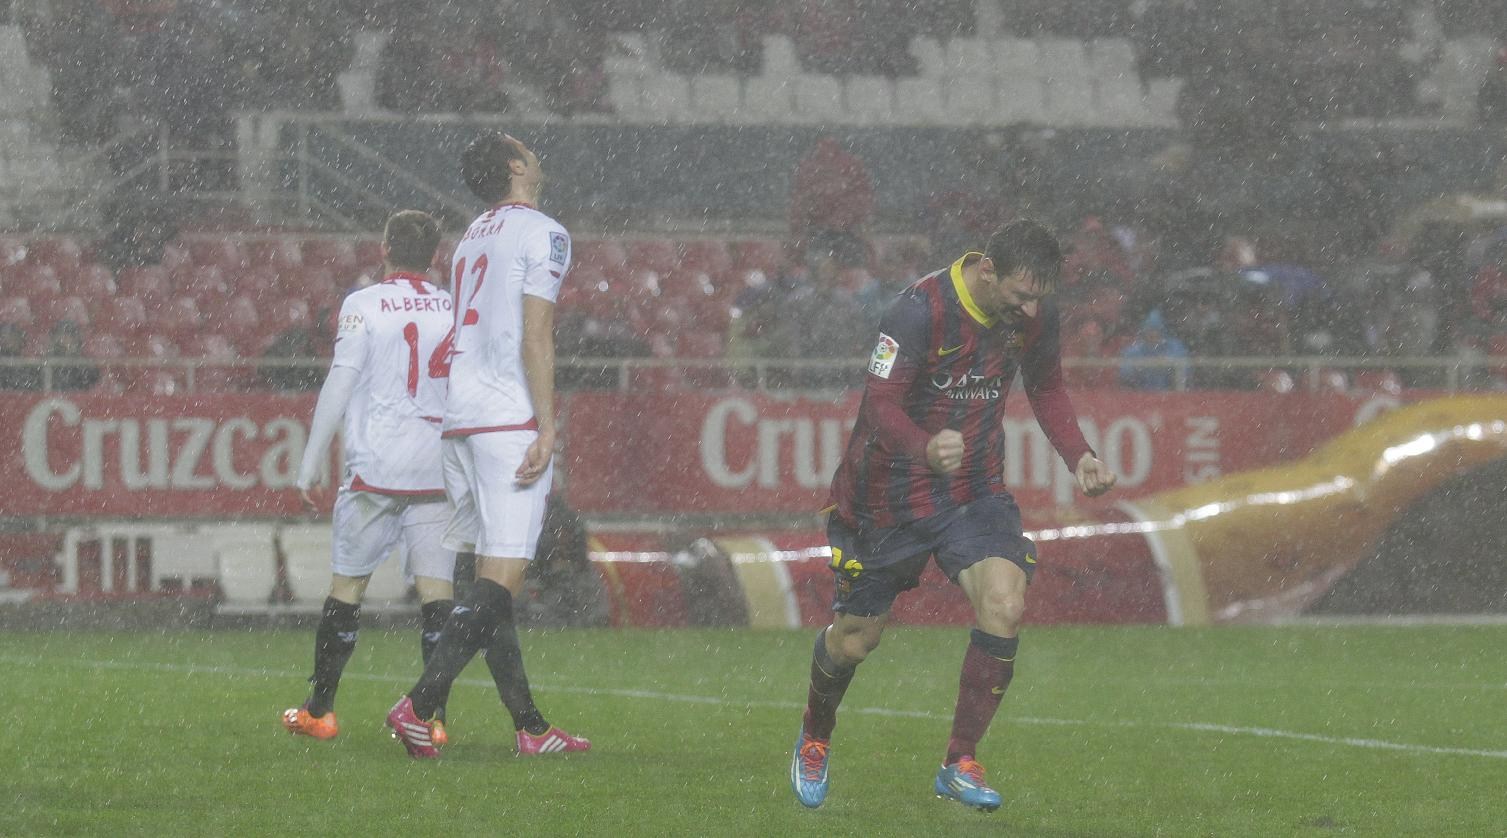 Messi playing soccer in the rain